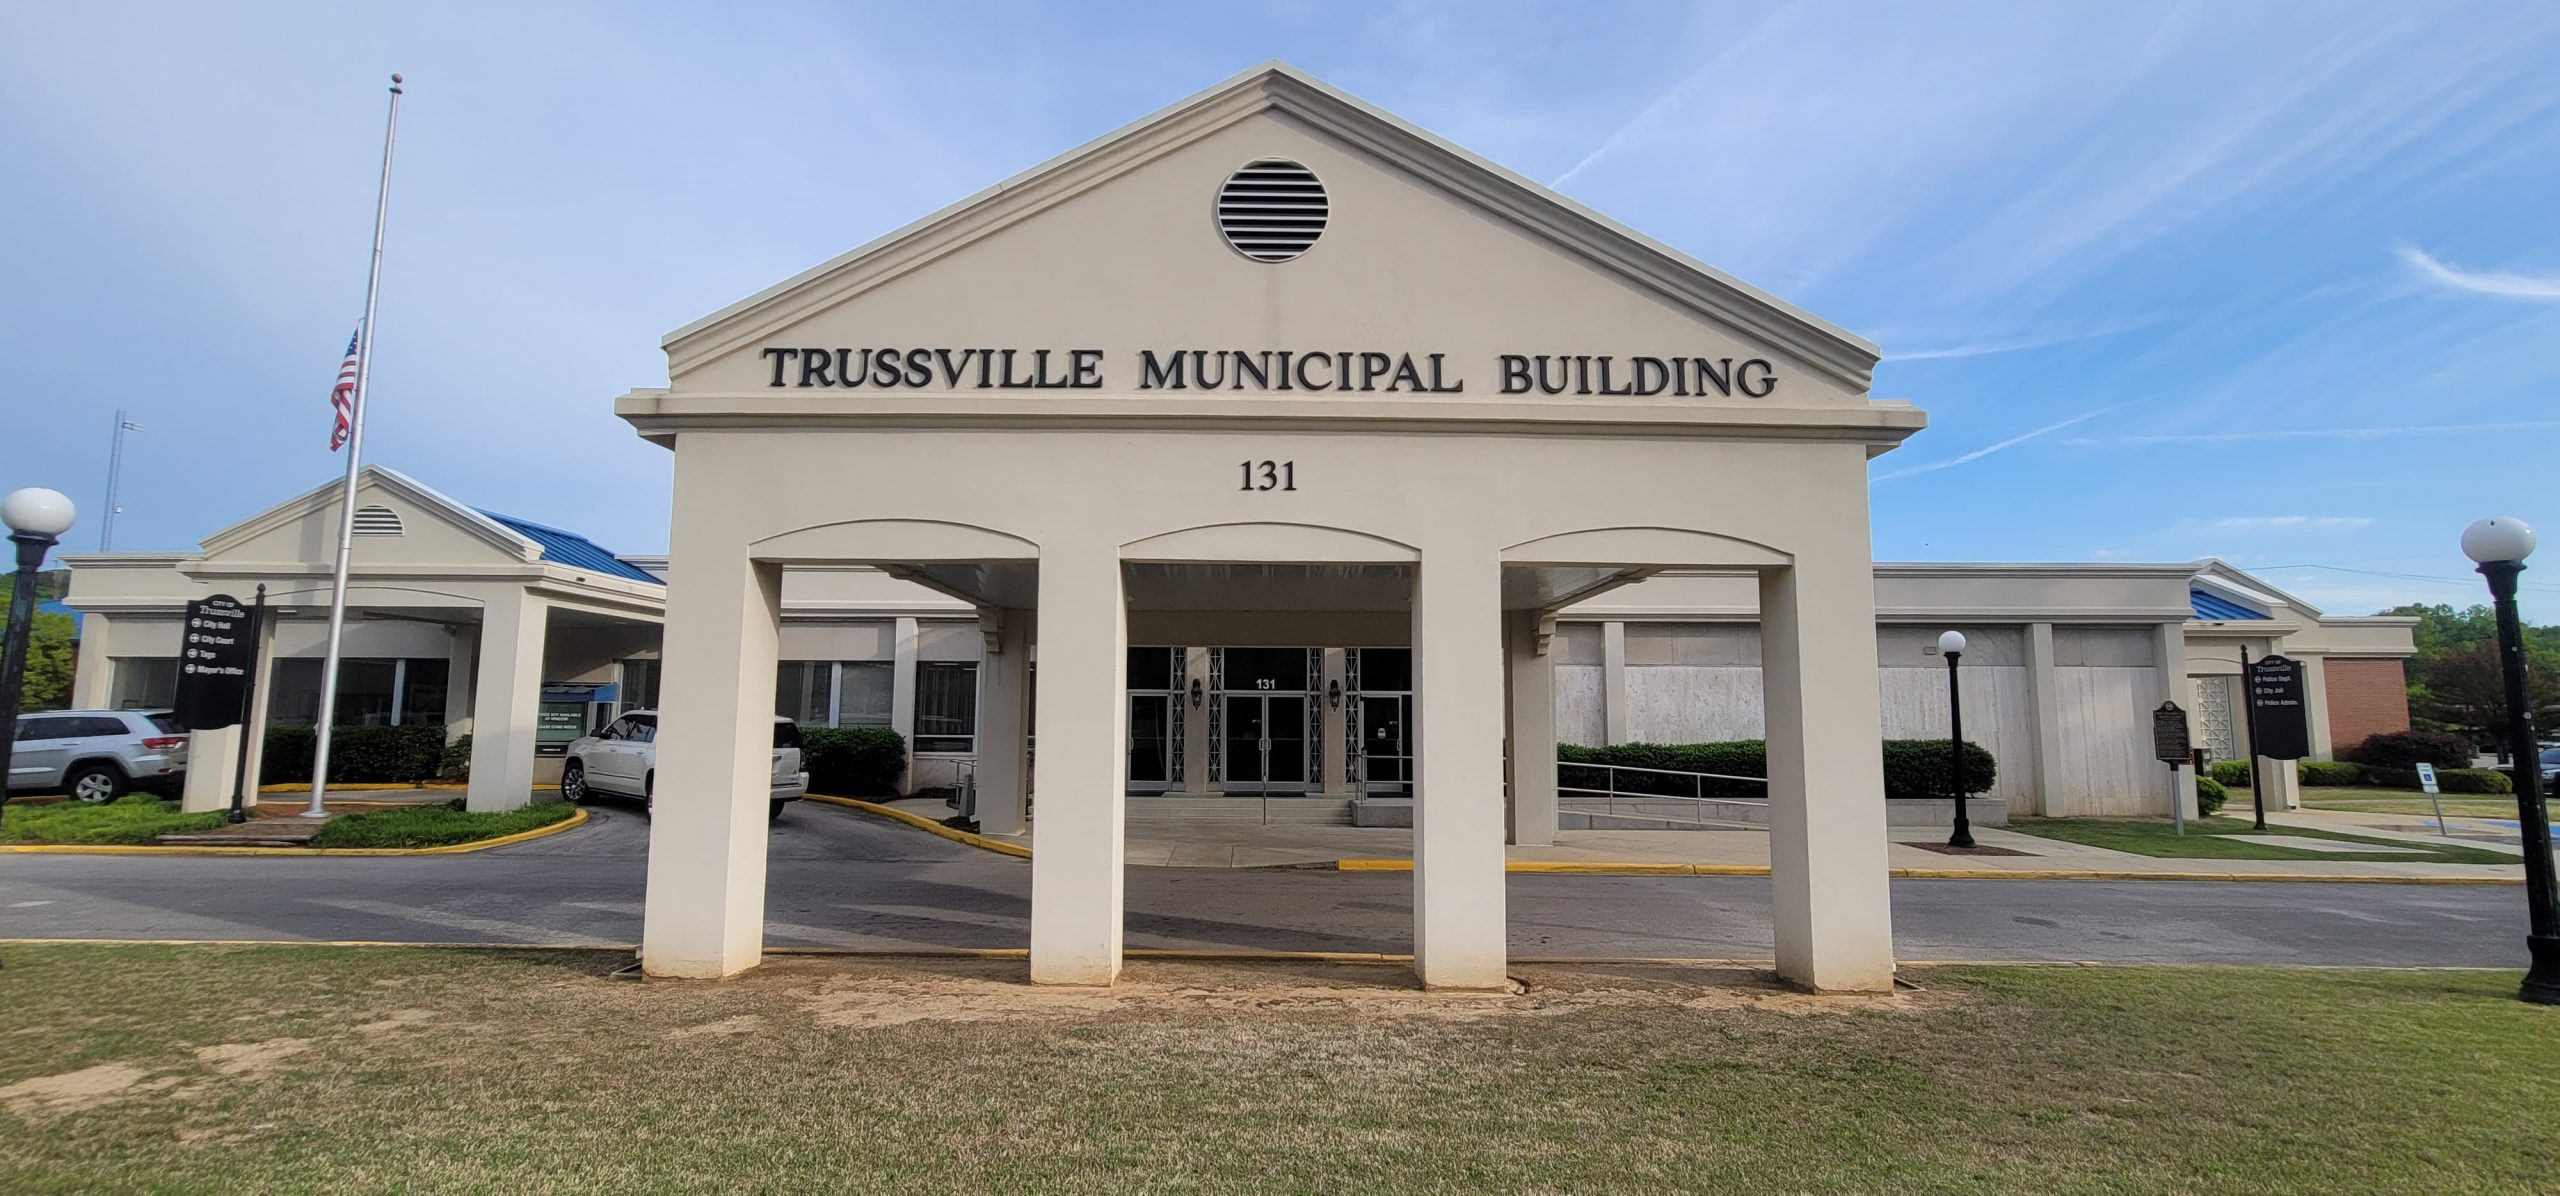 Jefferson County judge says it's a no-go for city of Trussville to hire on its own employees